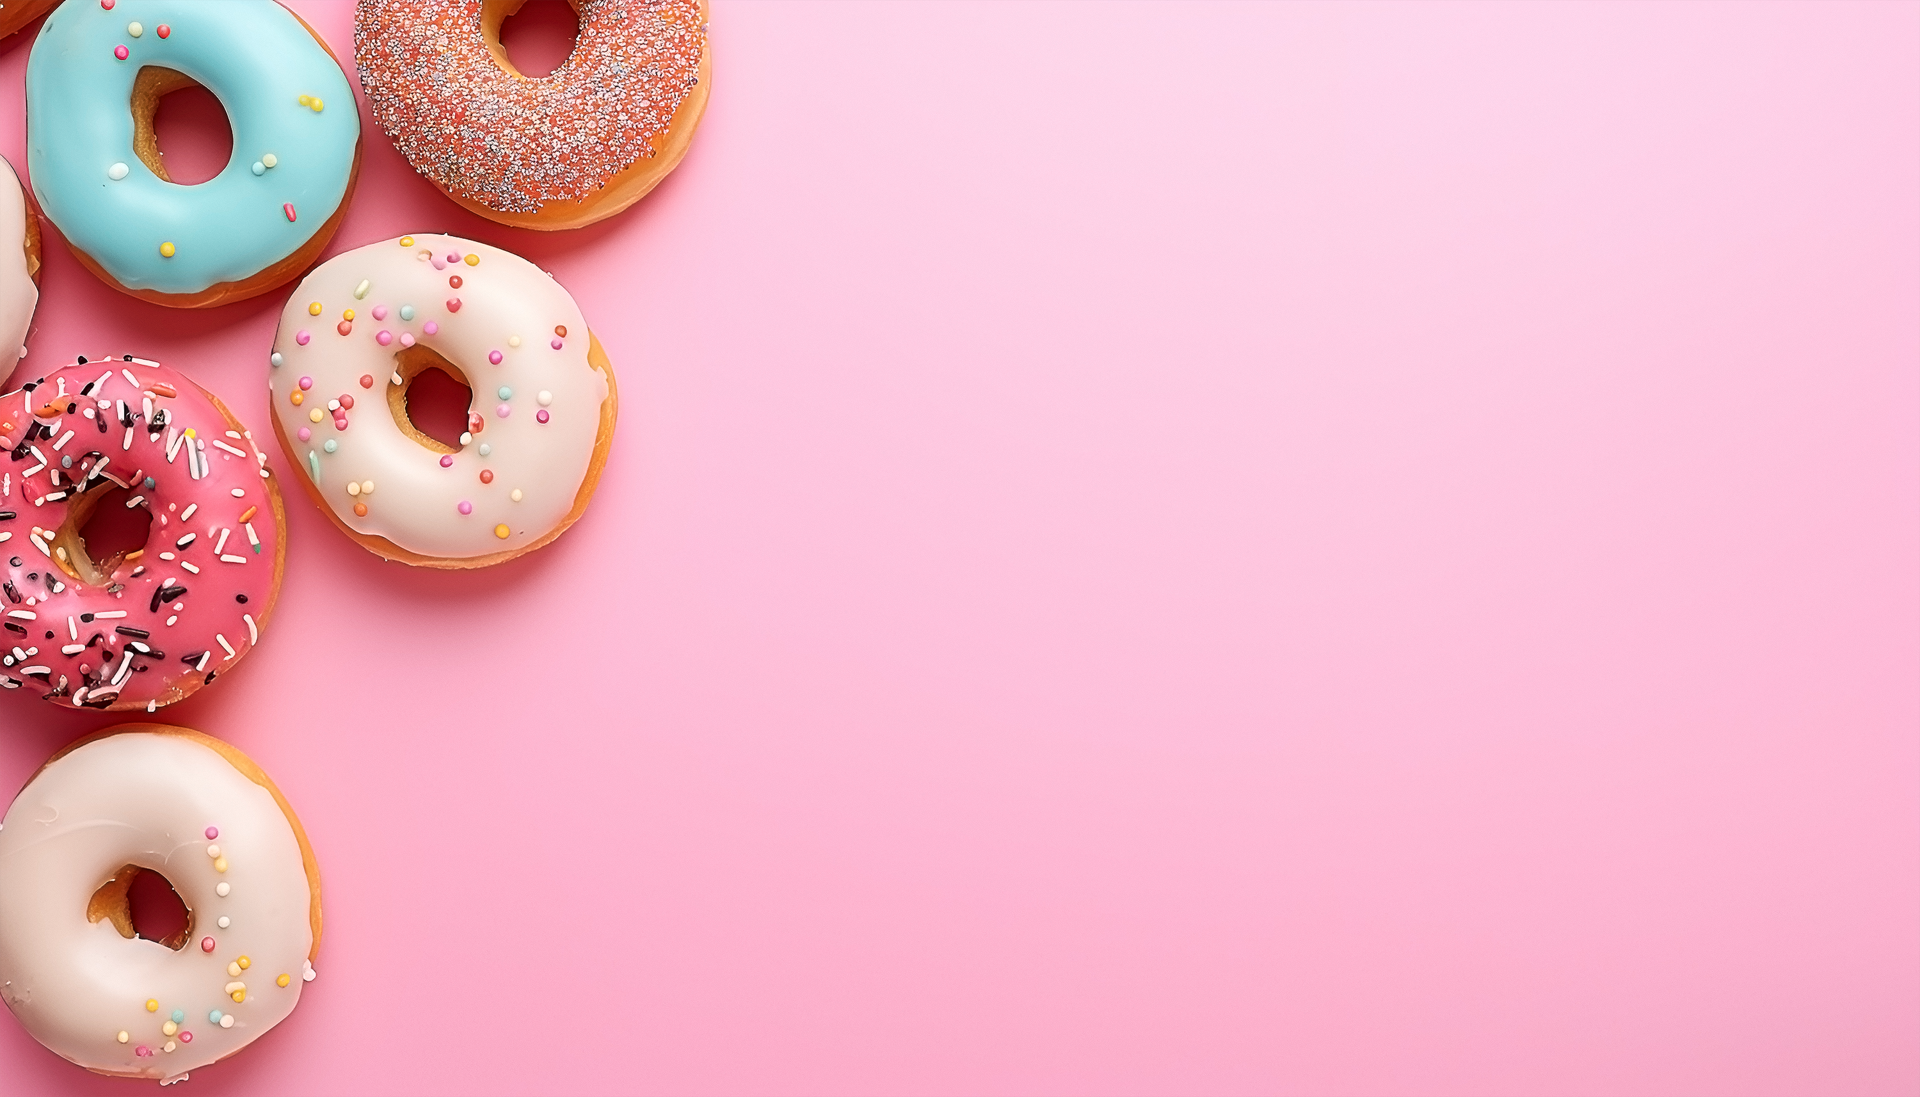 https://static.vecteezy.com/system/resources/previews/027/182/606/original/some-donut-on-the-left-light-pink-background-with-copy-space-top-view-png.png